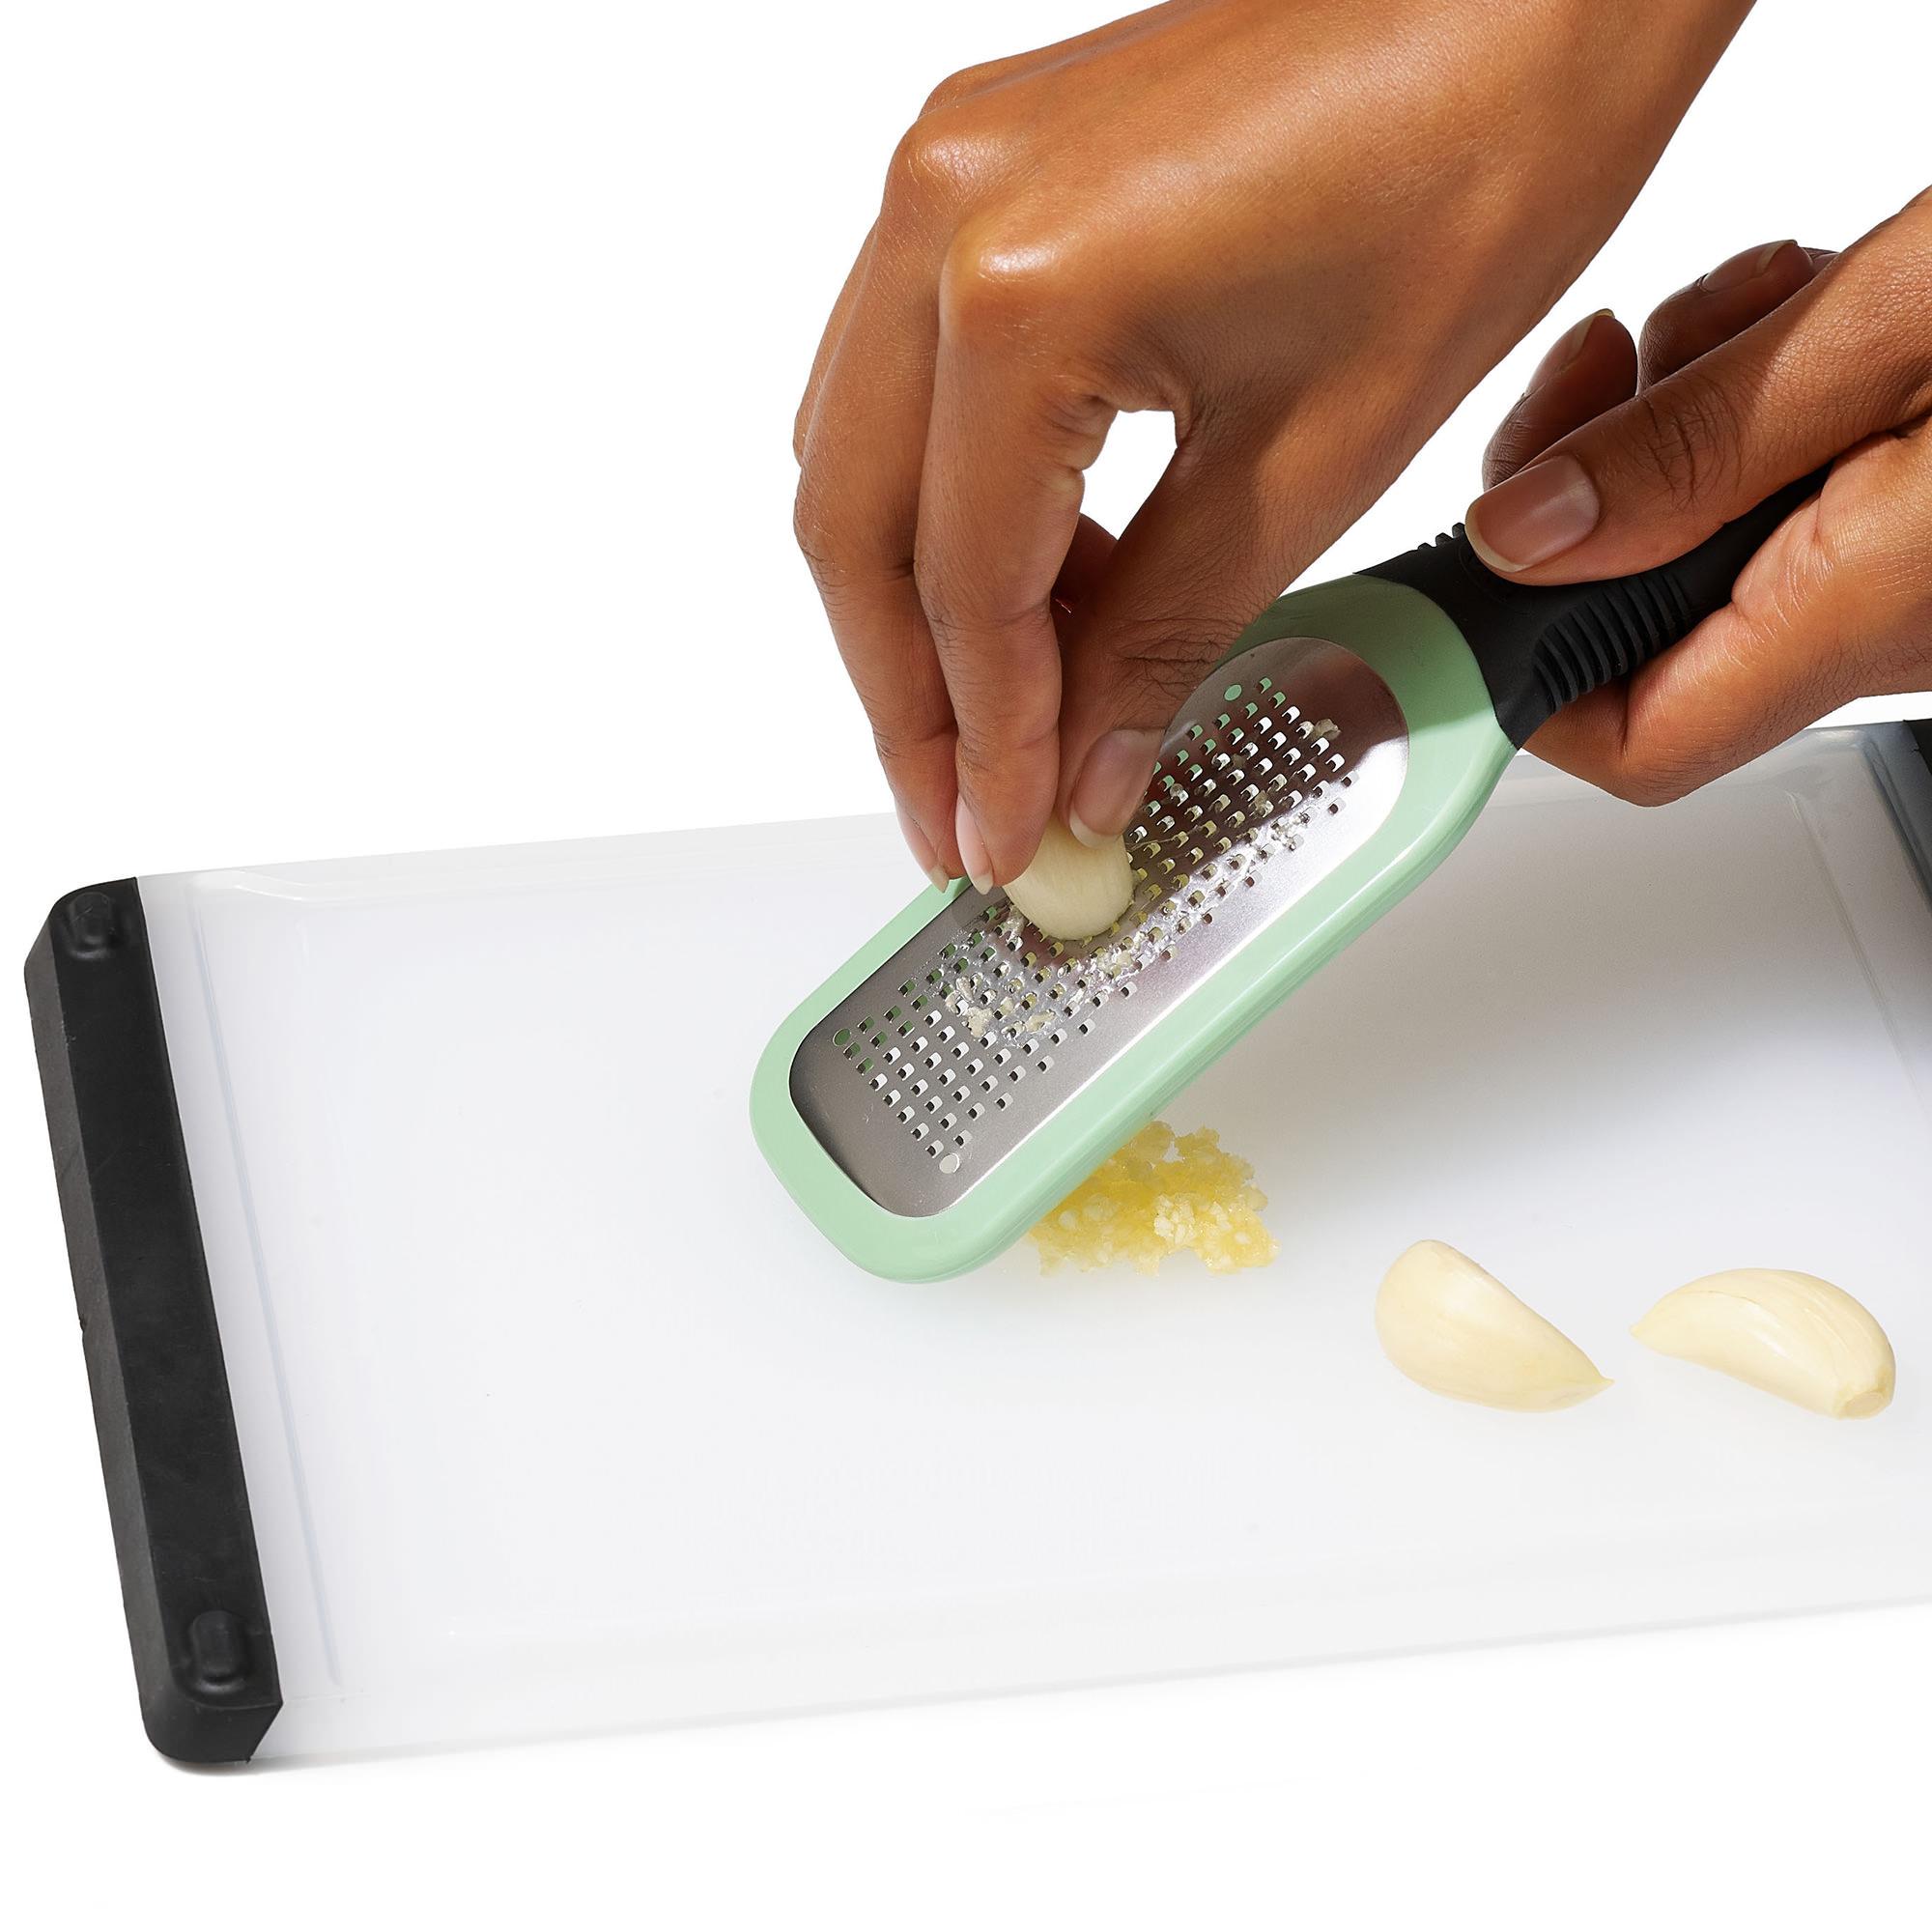 OXO Good Grips Etched Ginger & Garlic Grater Image 6